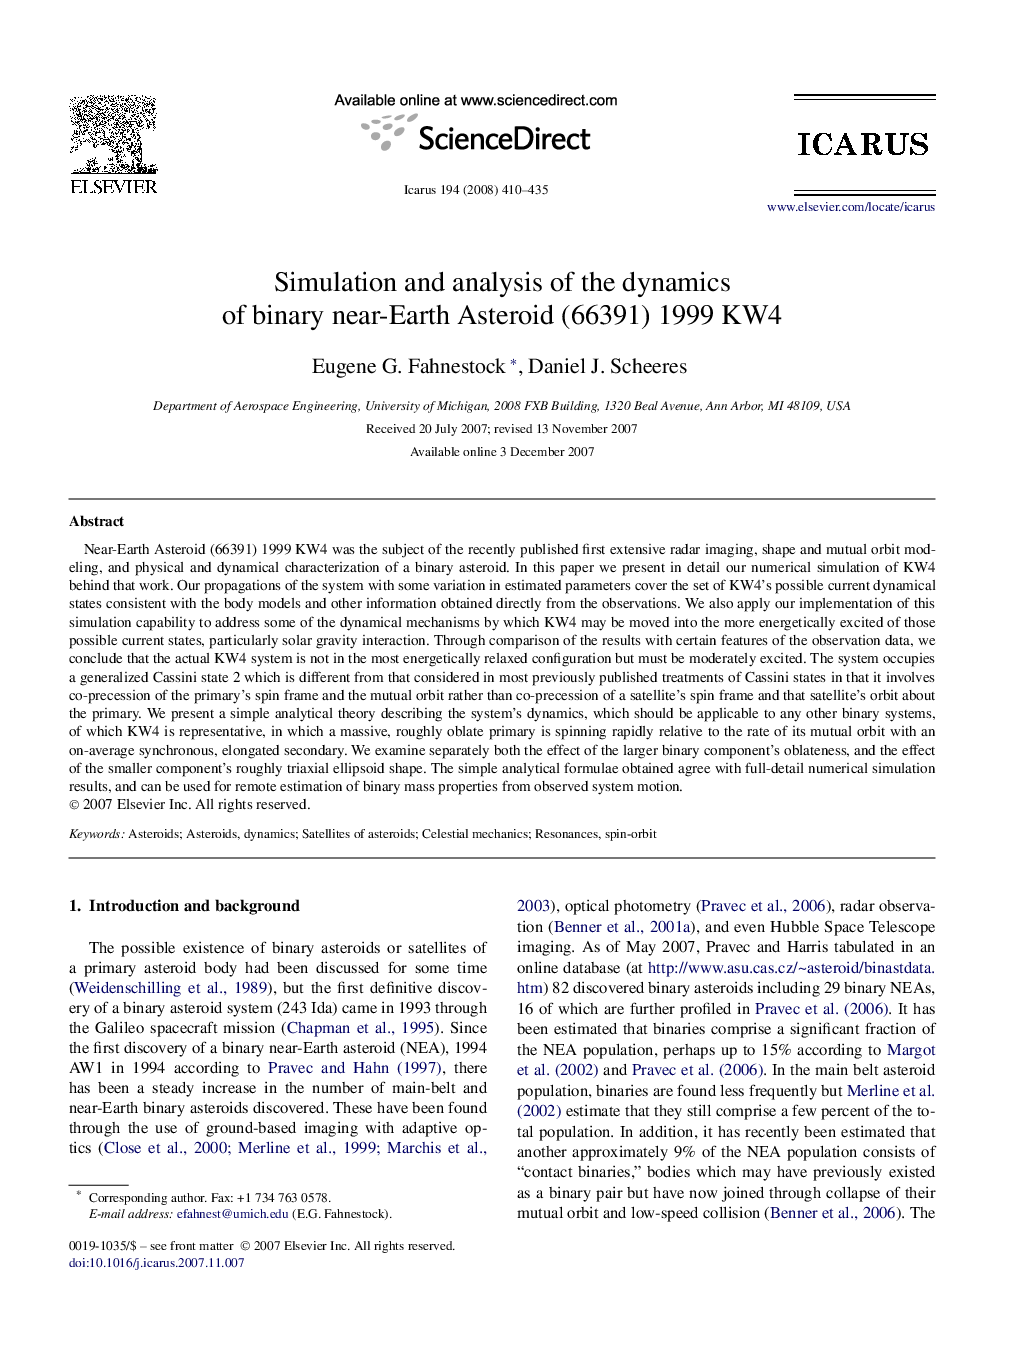 Simulation and analysis of the dynamics of binary near-Earth Asteroid (66391) 1999 KW4